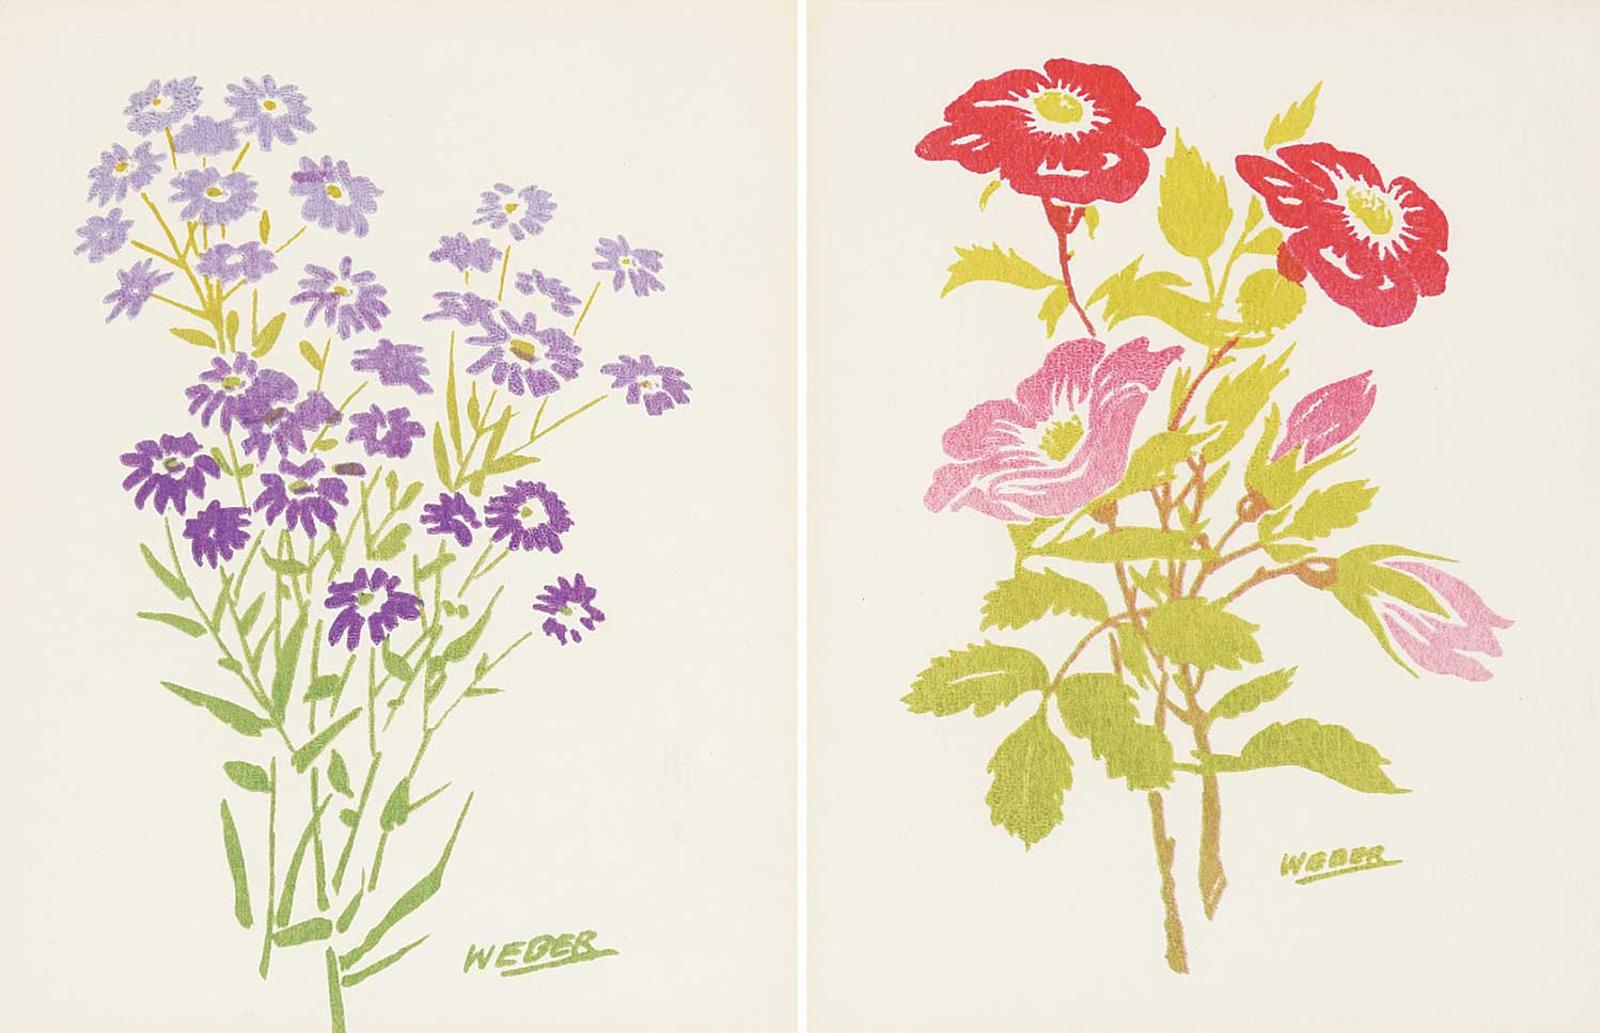 George Weber (1907-2002) - Alberta Rose and Wild Asters